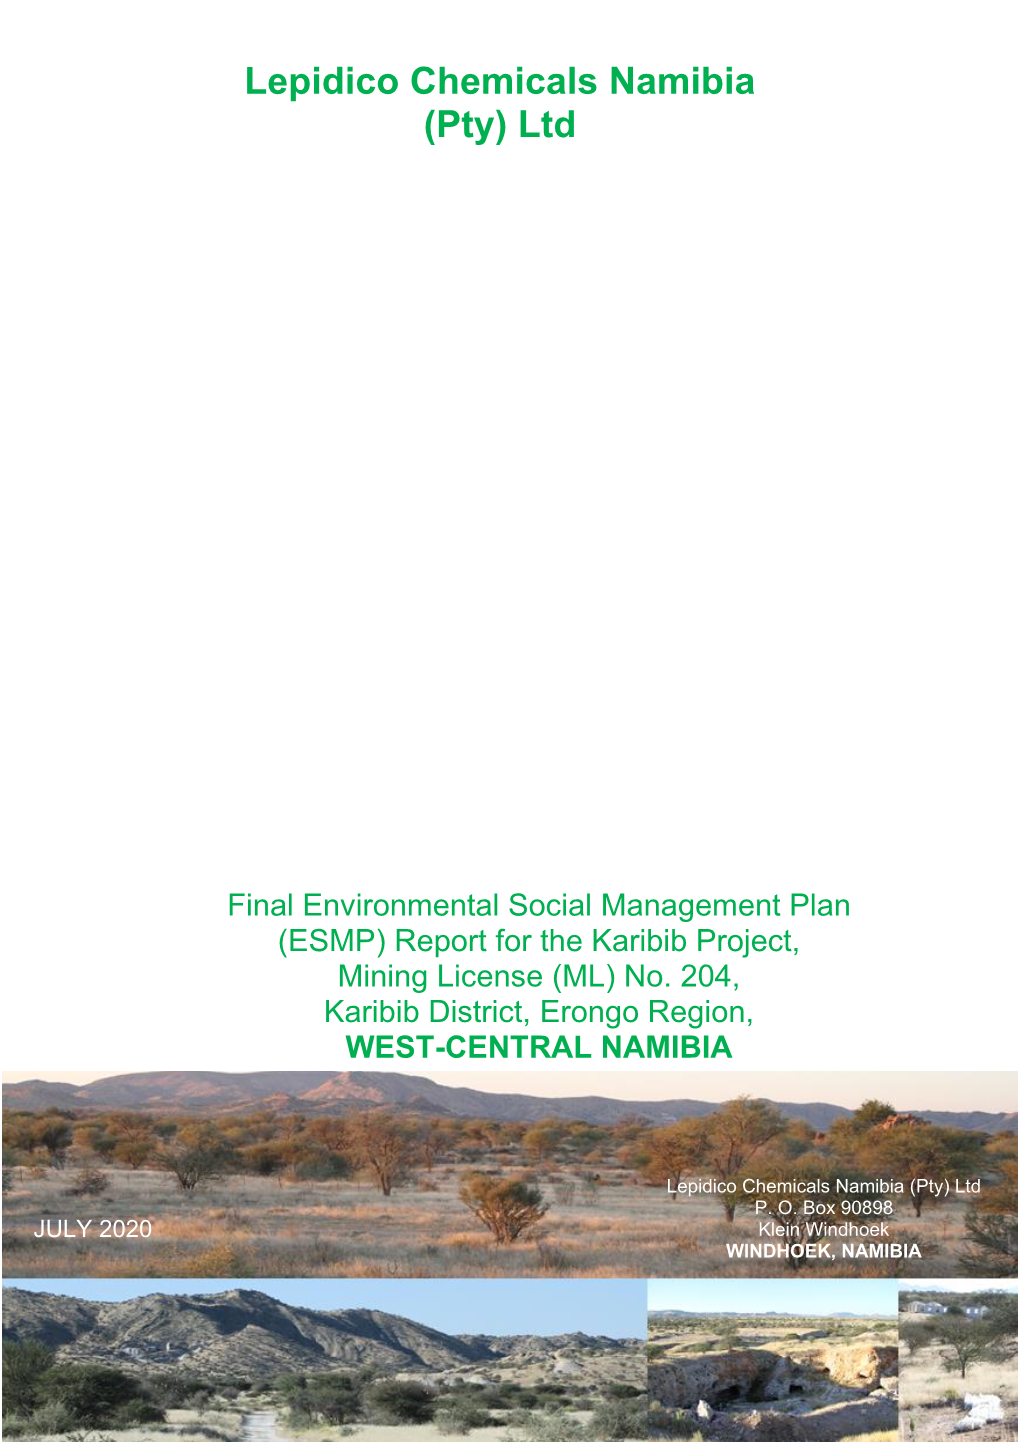 Final ESMP Report for the Karibib Project for Lepidico